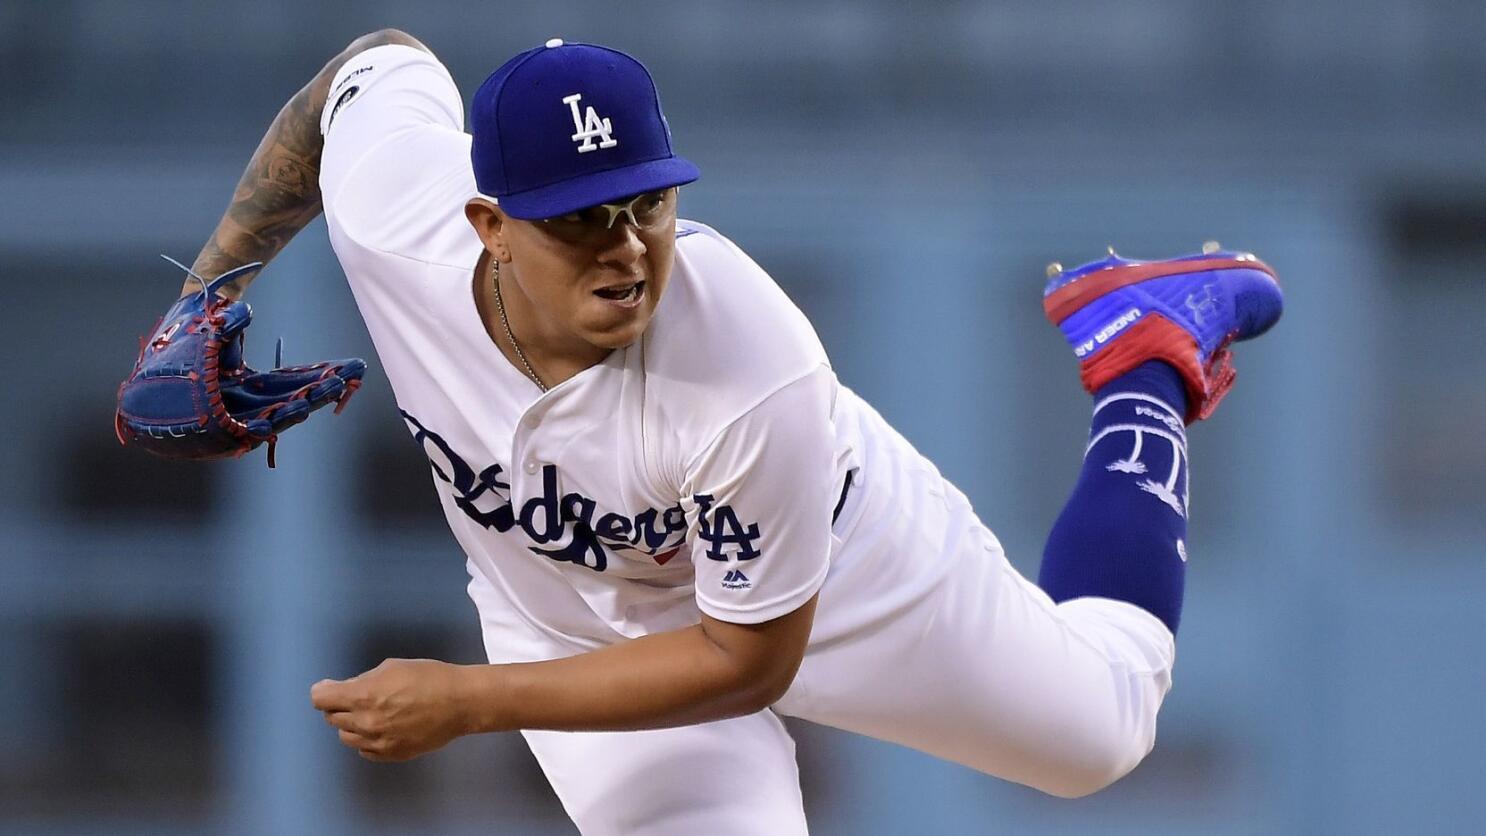 Julio Urías cannot be allowed to pitch again for the Dodgers - Los